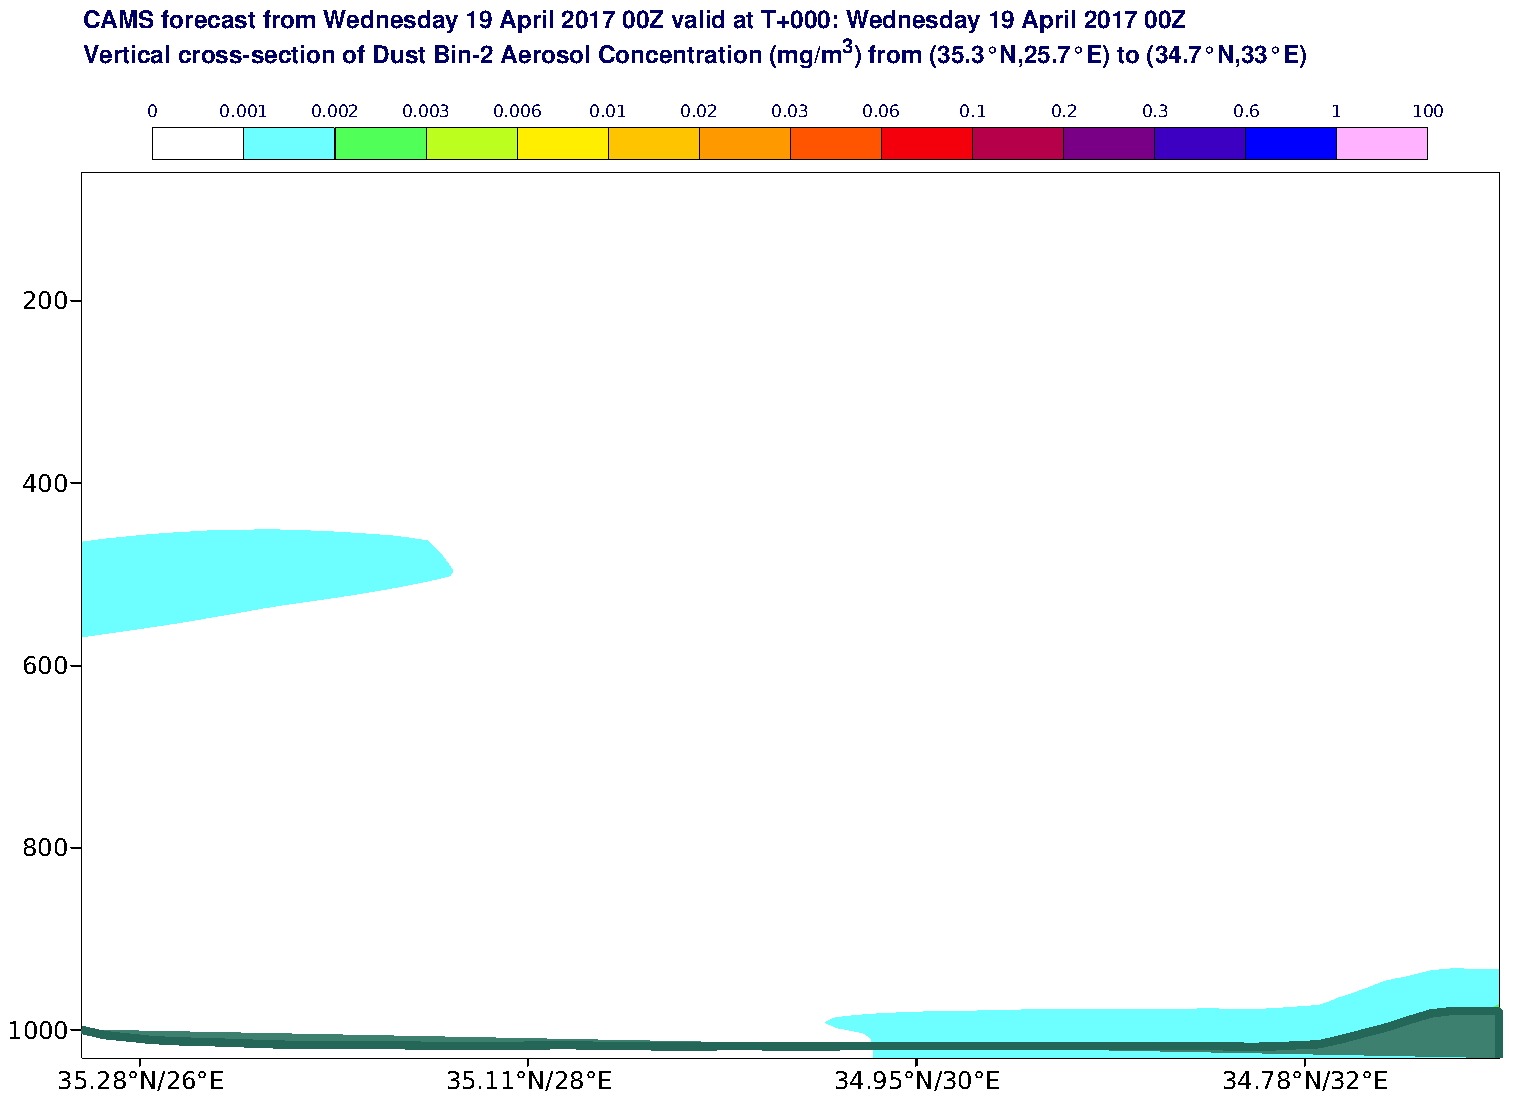 Vertical cross-section of Dust Bin-2 Aerosol Concentration (mg/m3) valid at T0 - 2017-04-19 00:00